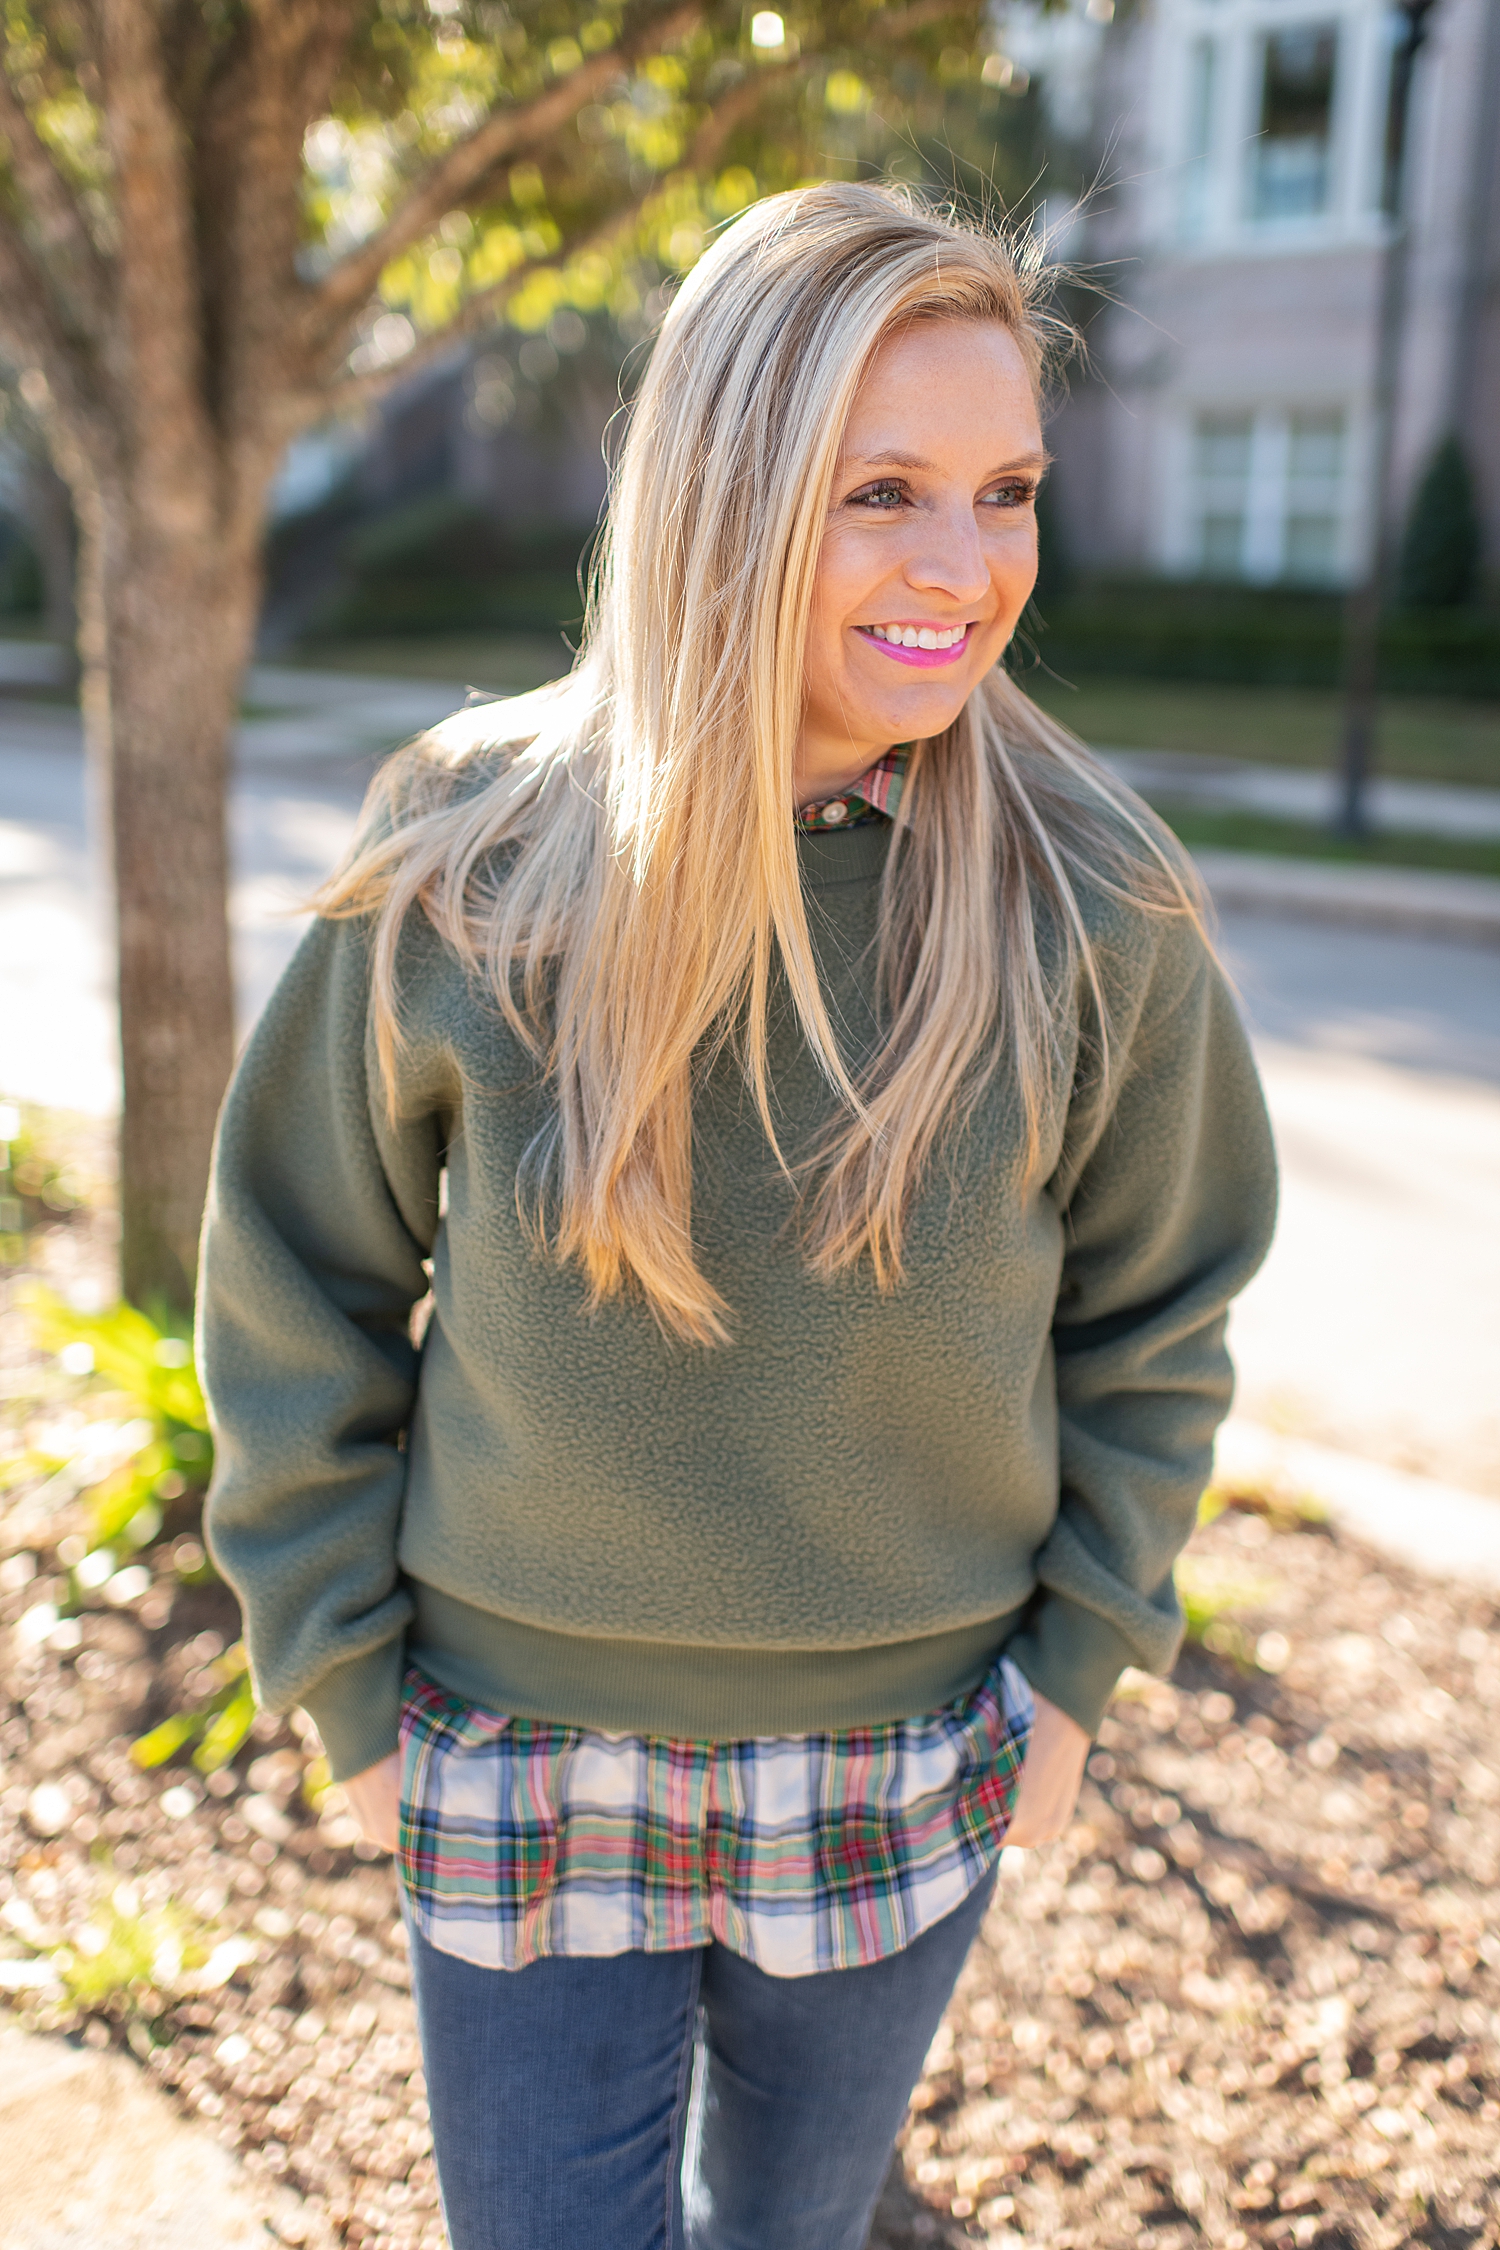 The Best Cozy Gift Ideas featured by top Houston fashion blogger, Fancy Ashley: picture of a blonde woman wearing a green Everlane fleece sweatshirt, J.Crew tartan shirt, J.Crew skinny jeans and Golden Goose sneakers